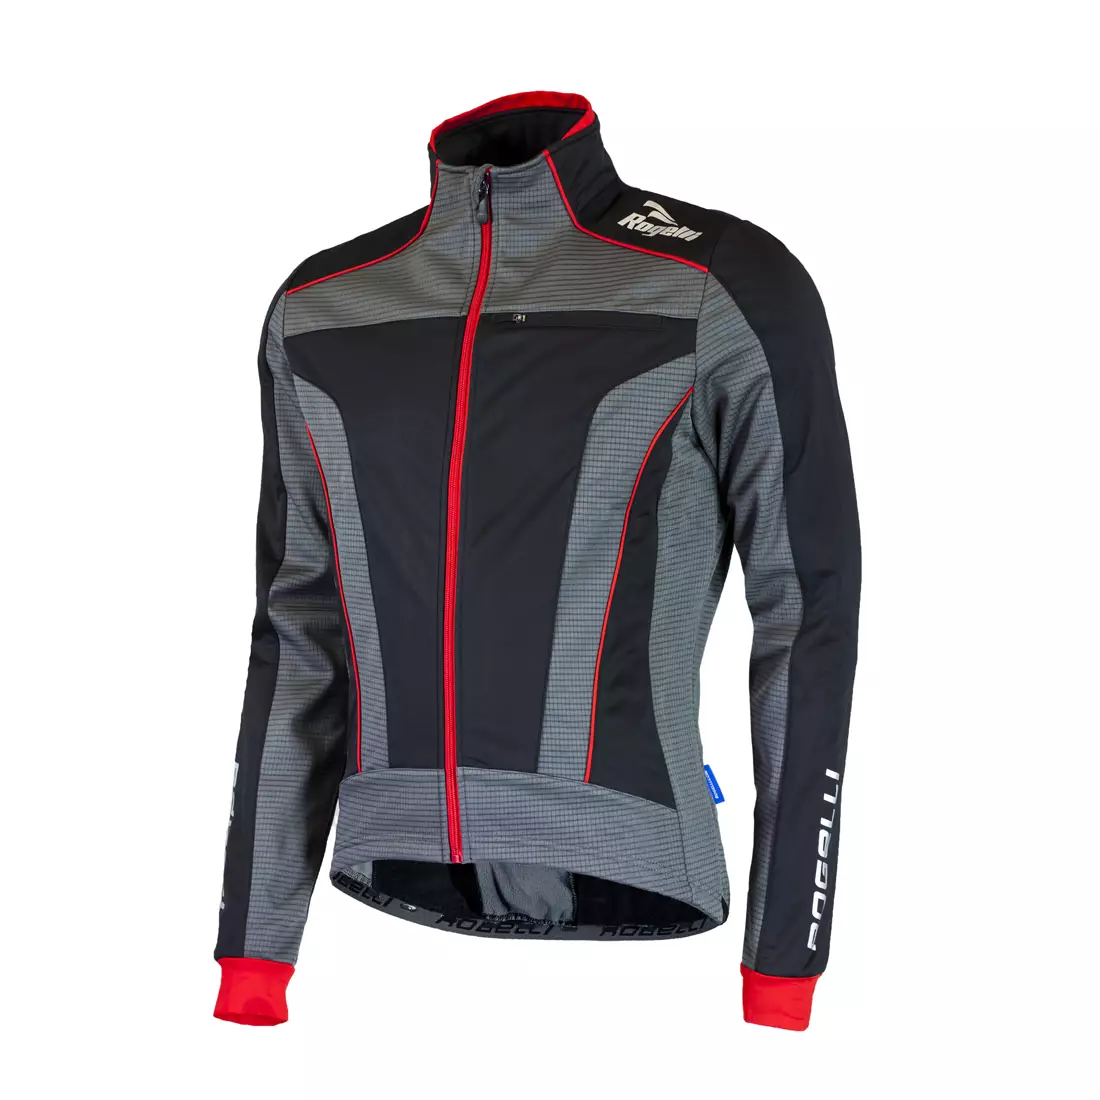 ROGELLI TRANI 3.0 winter cycling jacket, black and red